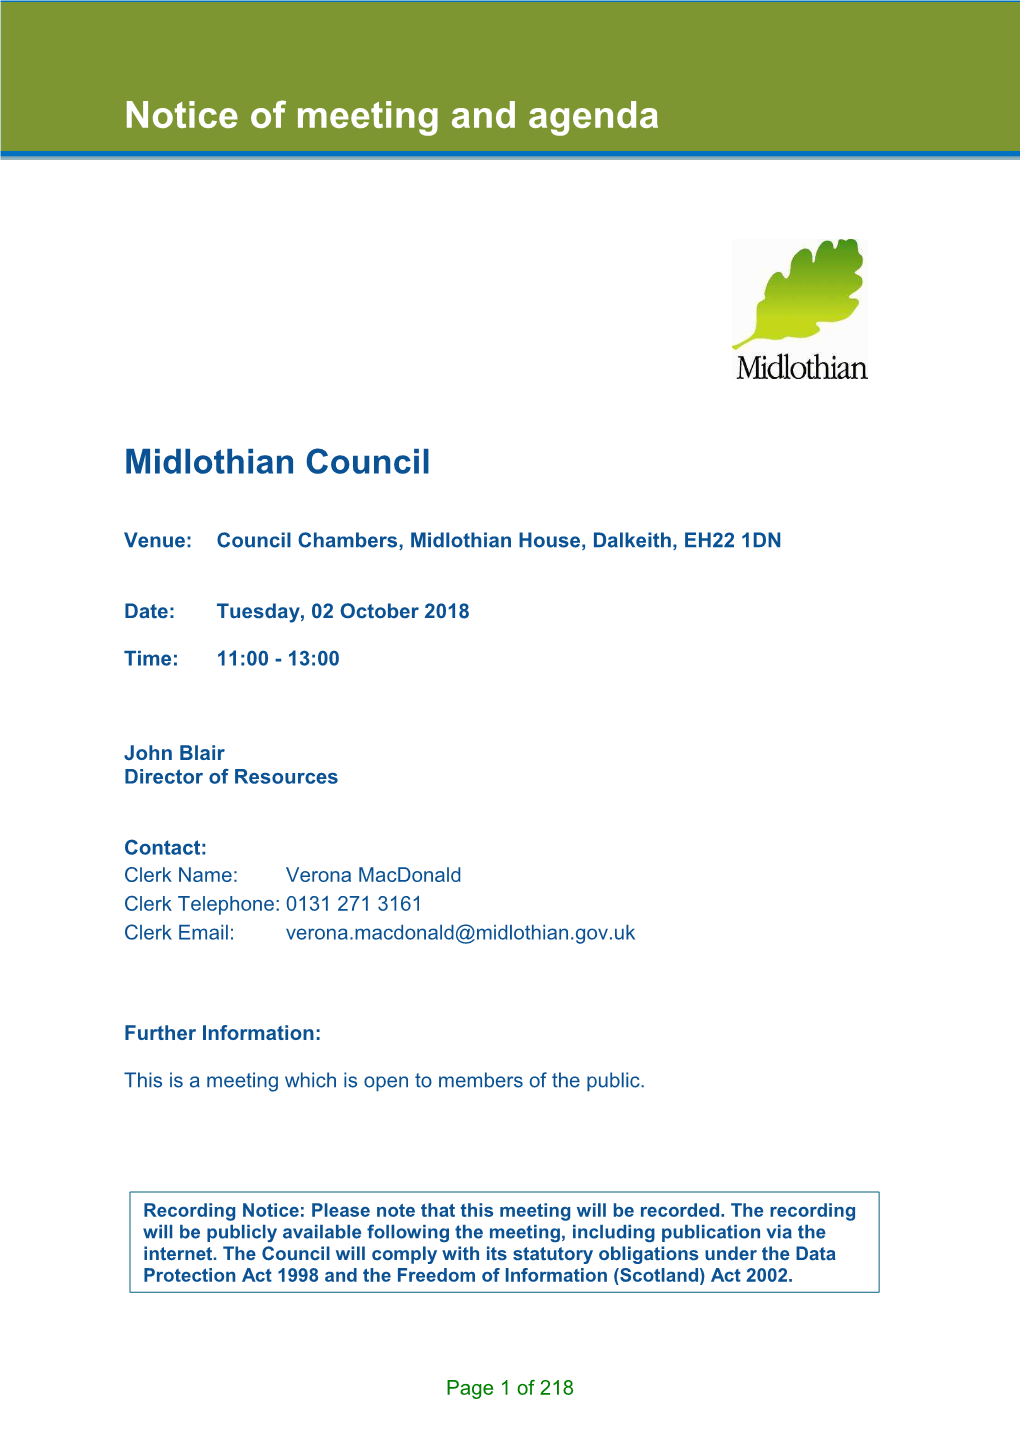 Notice of Meeting and Agenda Midlothian Council